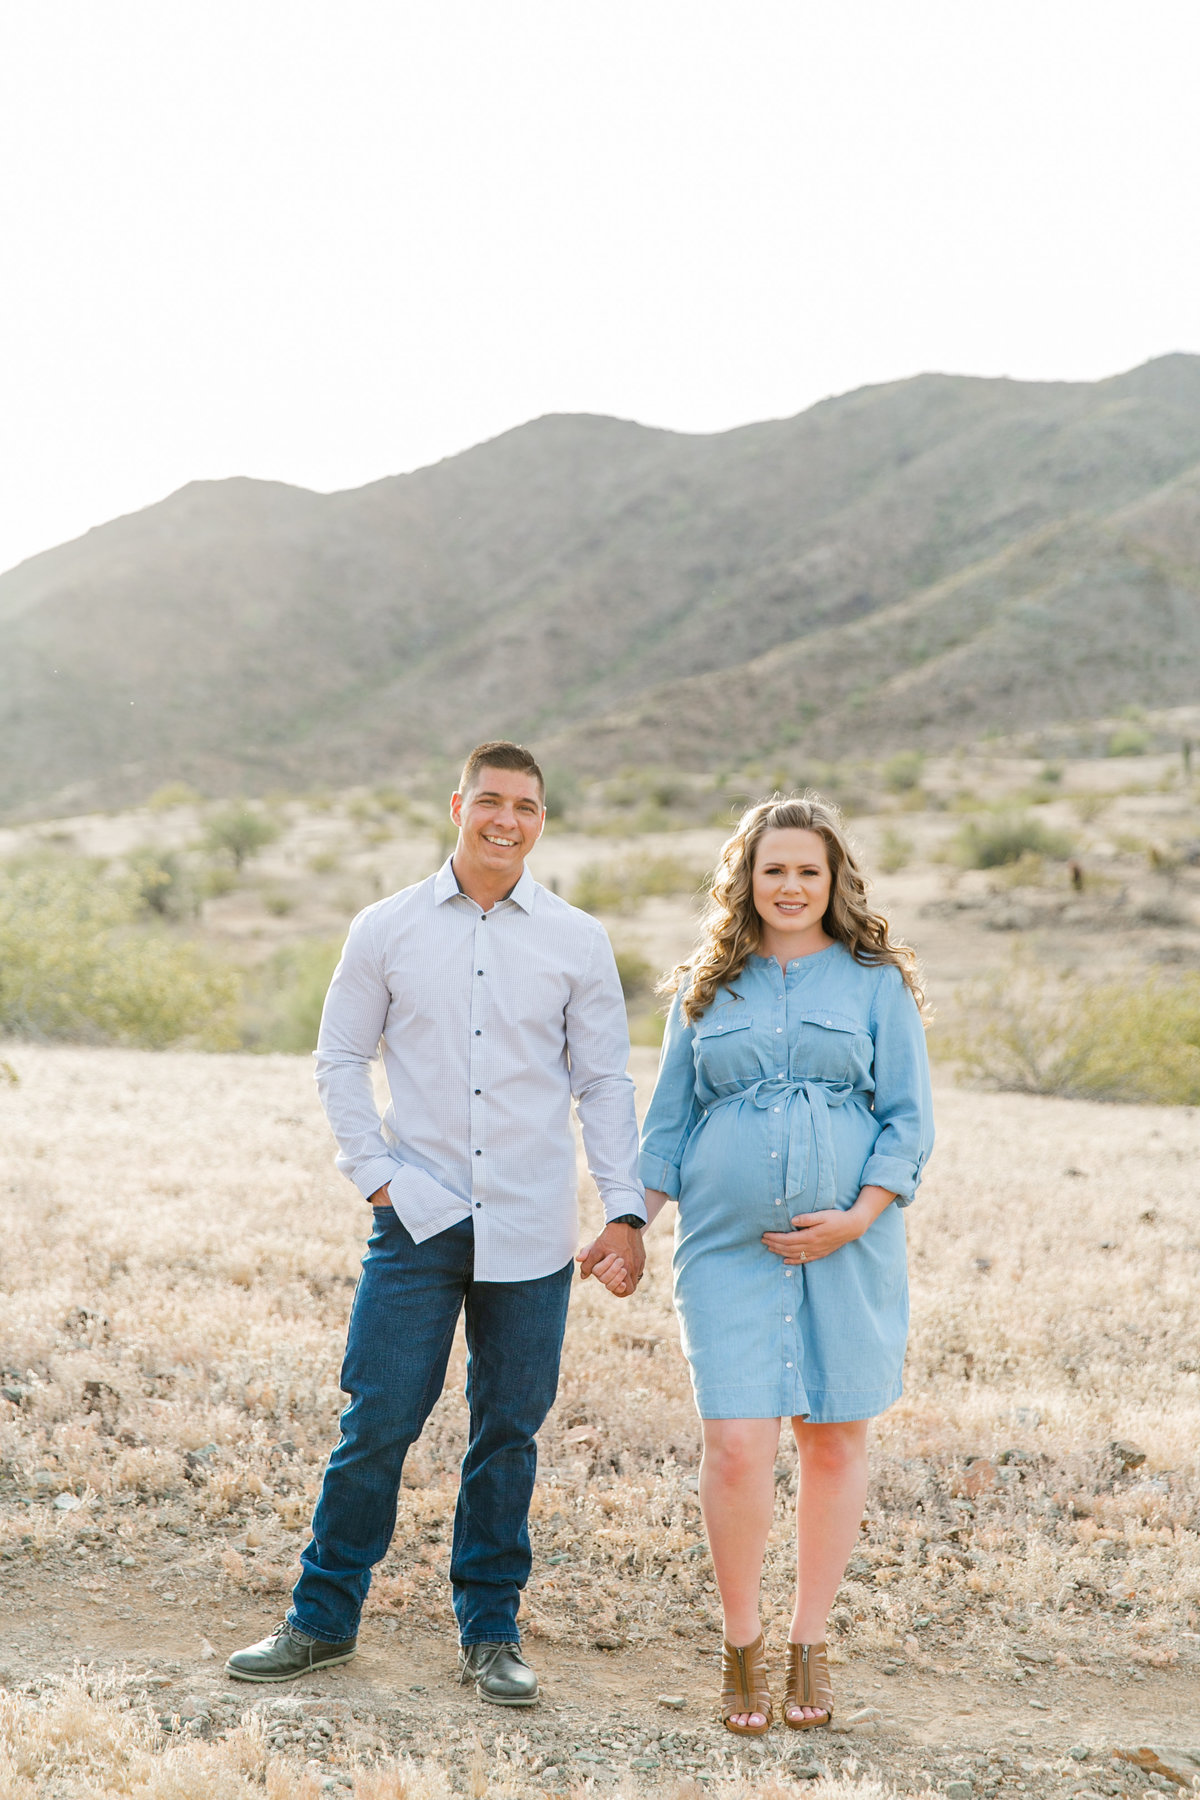 Karlie Colleen Photography - Arizona Maternity Photography - Brittany & Kyle-62